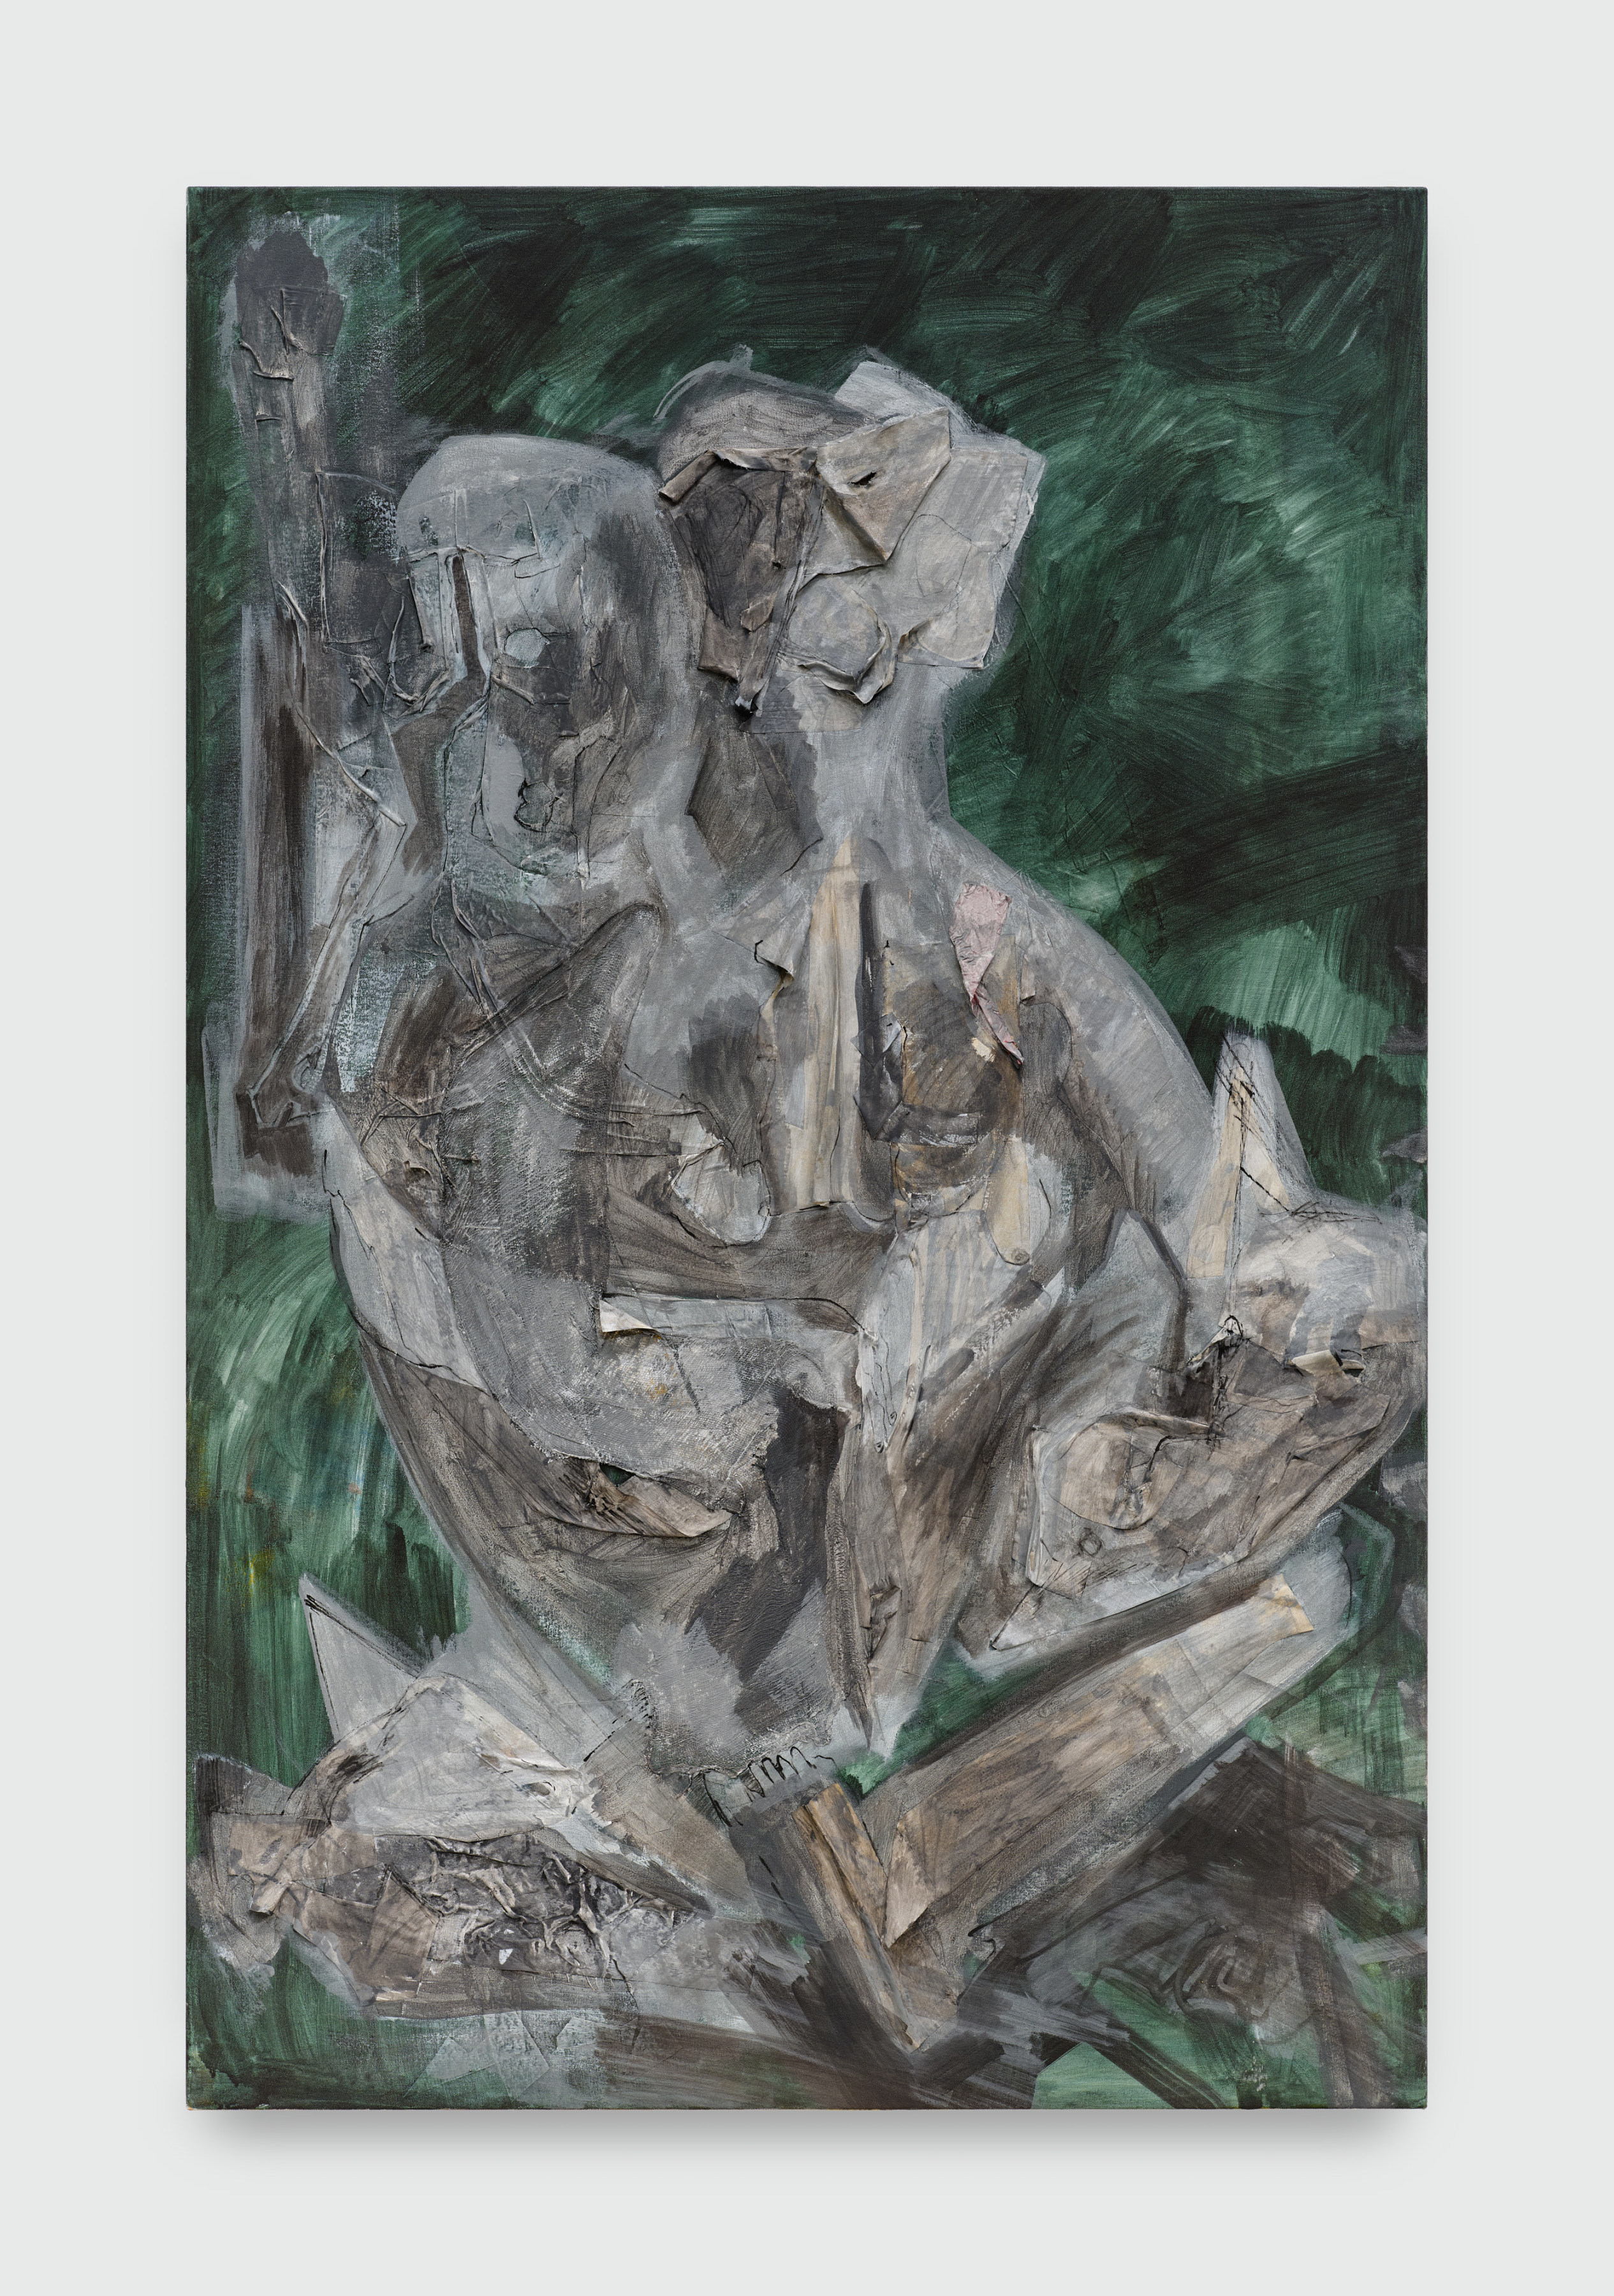 A textured painting of a grey anthropomorphic form against an emerald green back ground. 